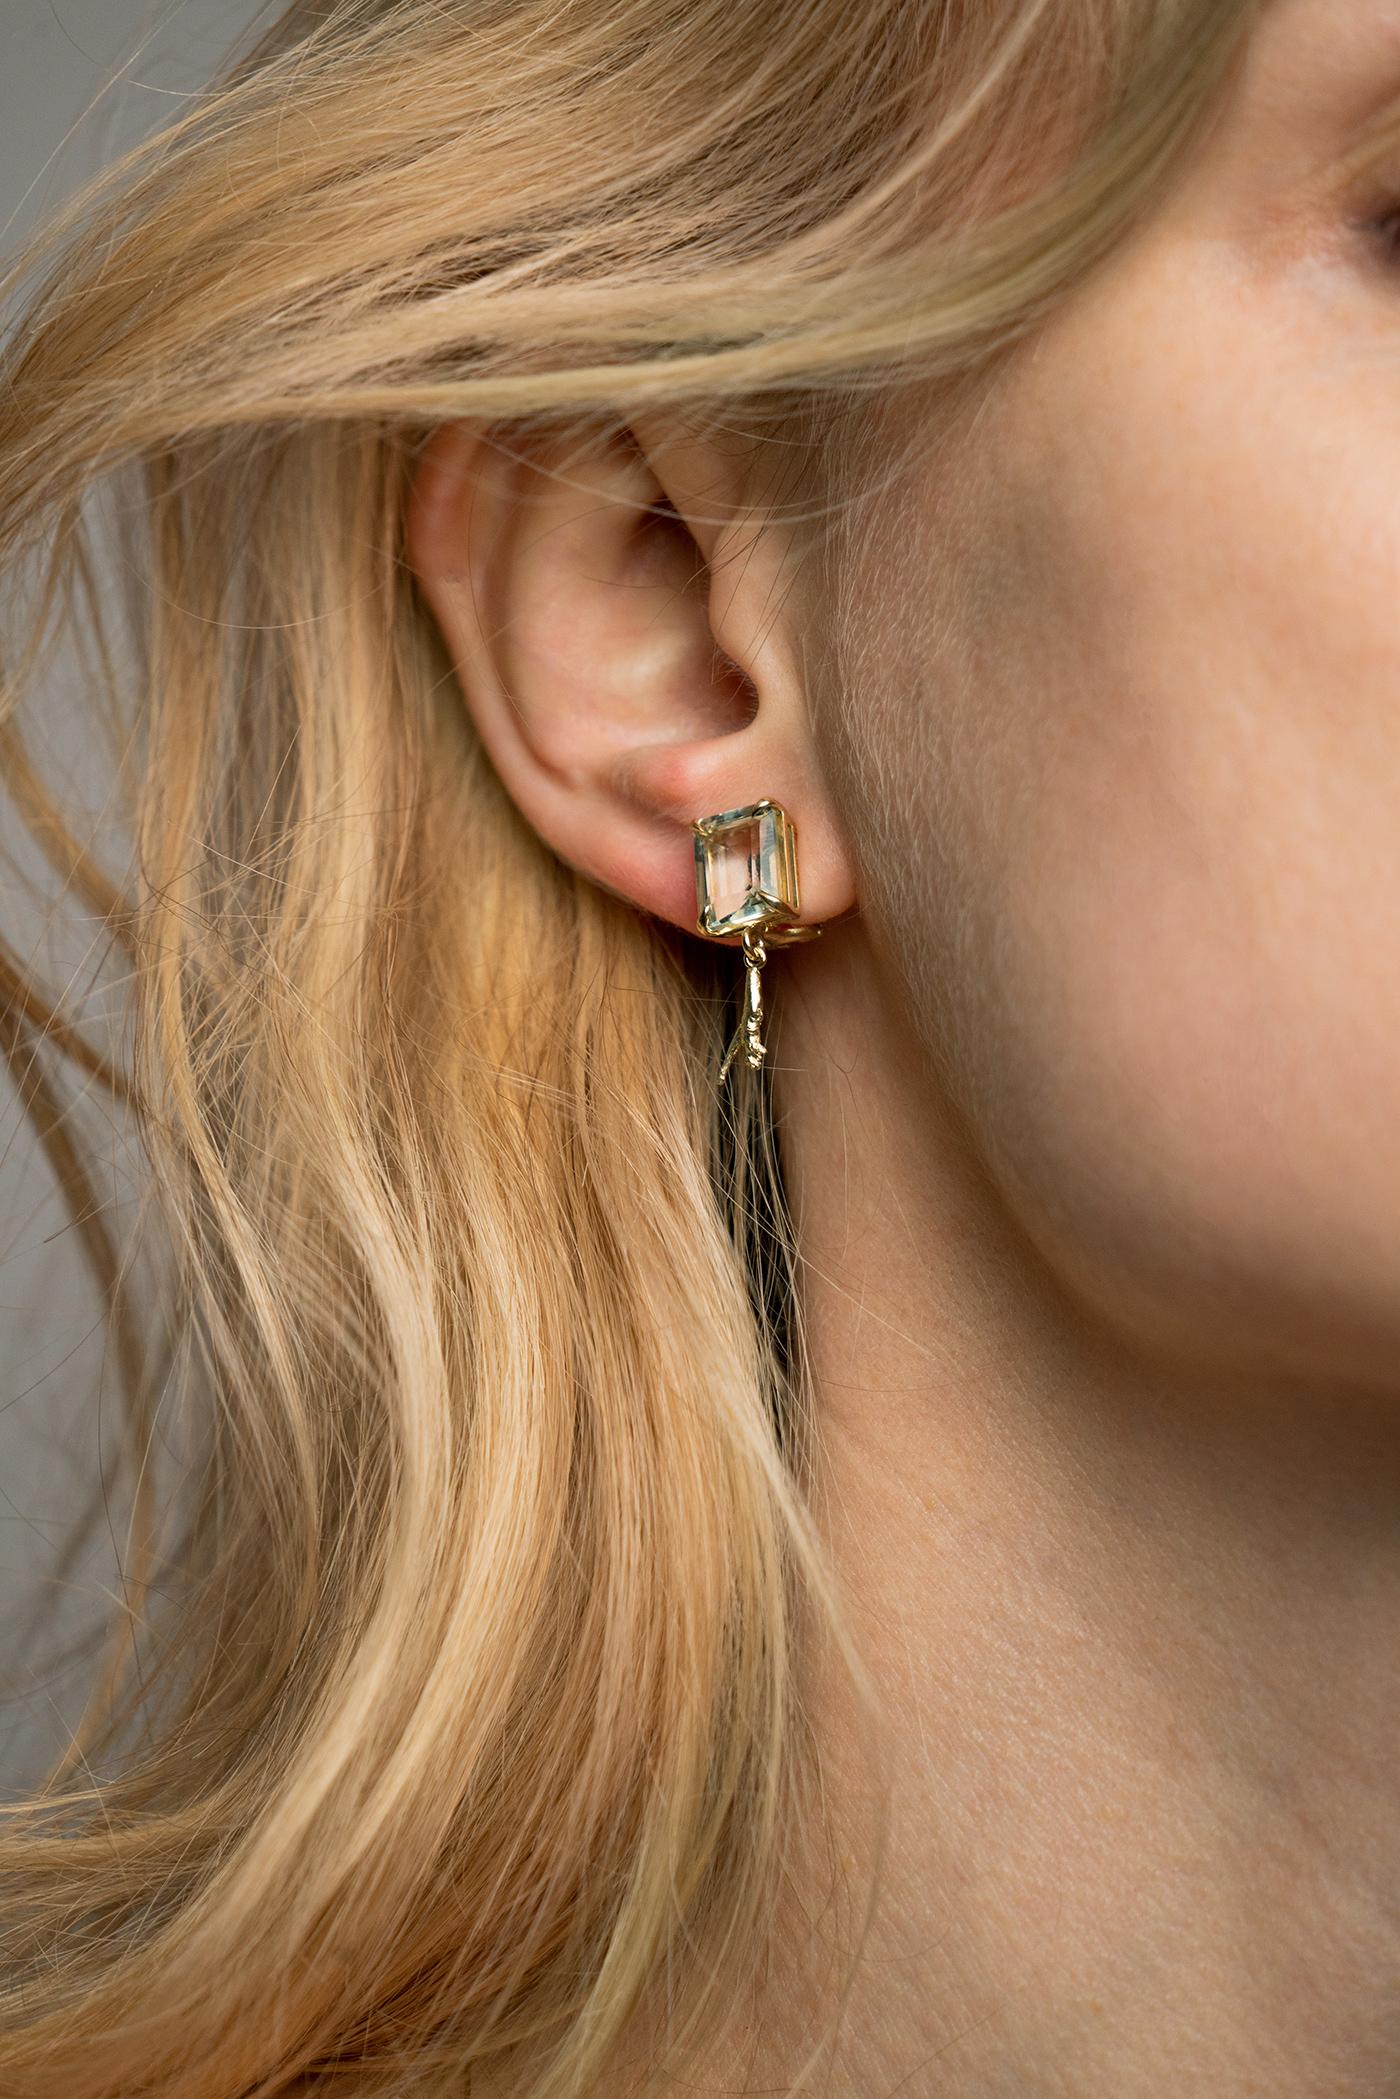 These contemporary clip-on earrings were part of a collection featured in a published issue of Vogue UA. They were designed by the Berlin-based oil painter Polya Medvedeva, and are made of 14 karat yellow gold. The earrings feature large,